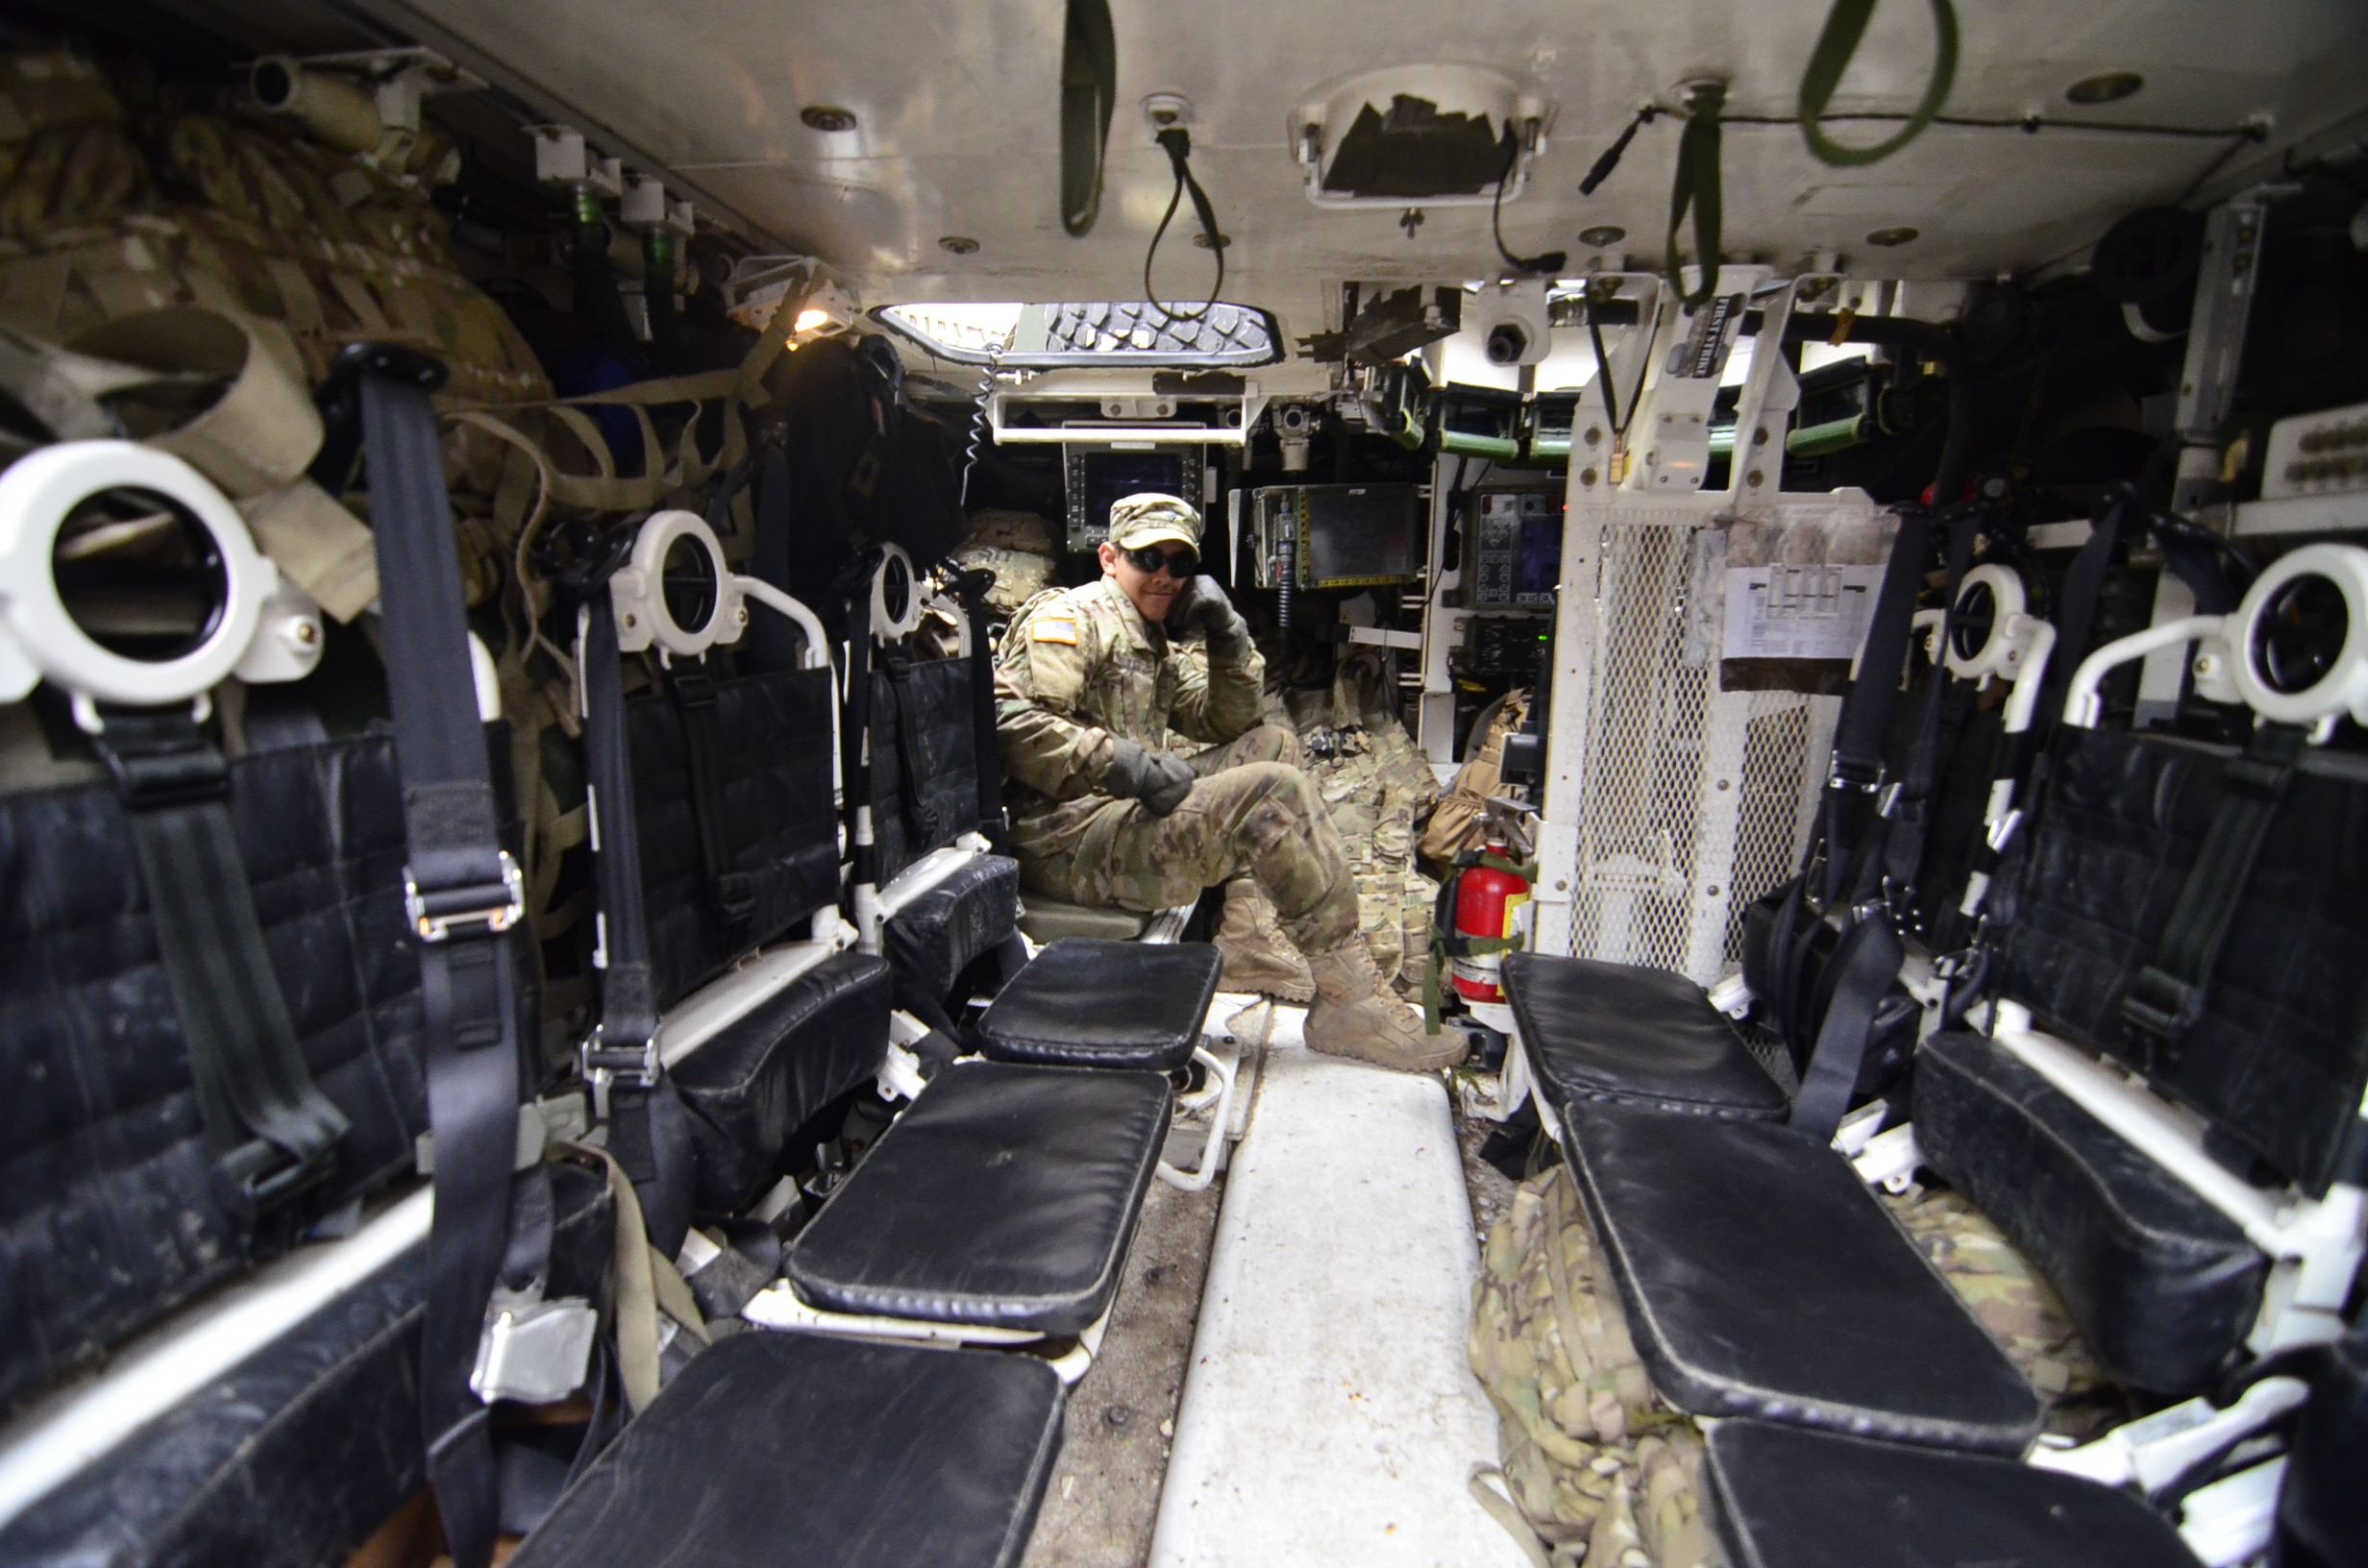 soldier sitting inside vehicle with his left hand on his cheek